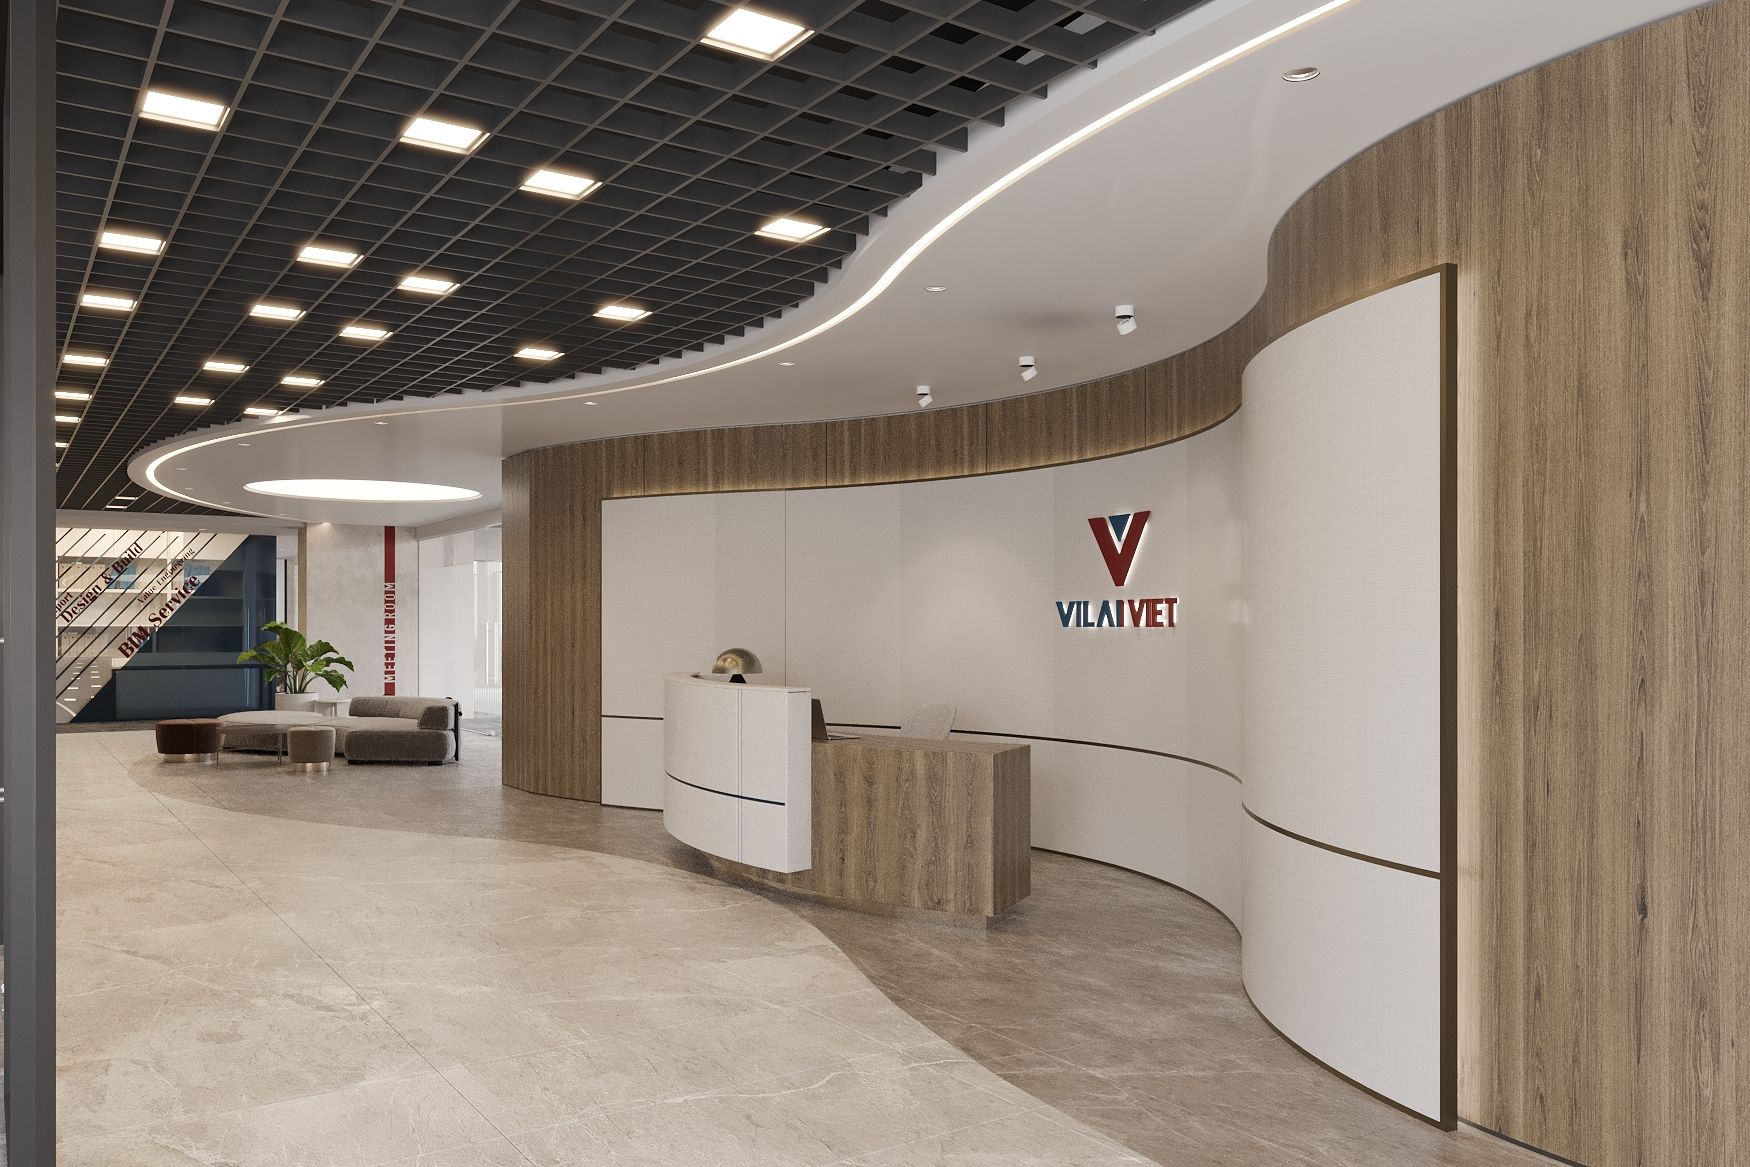 New image, new chapter - Vilai Viet marks a new milestone with a new headquarters